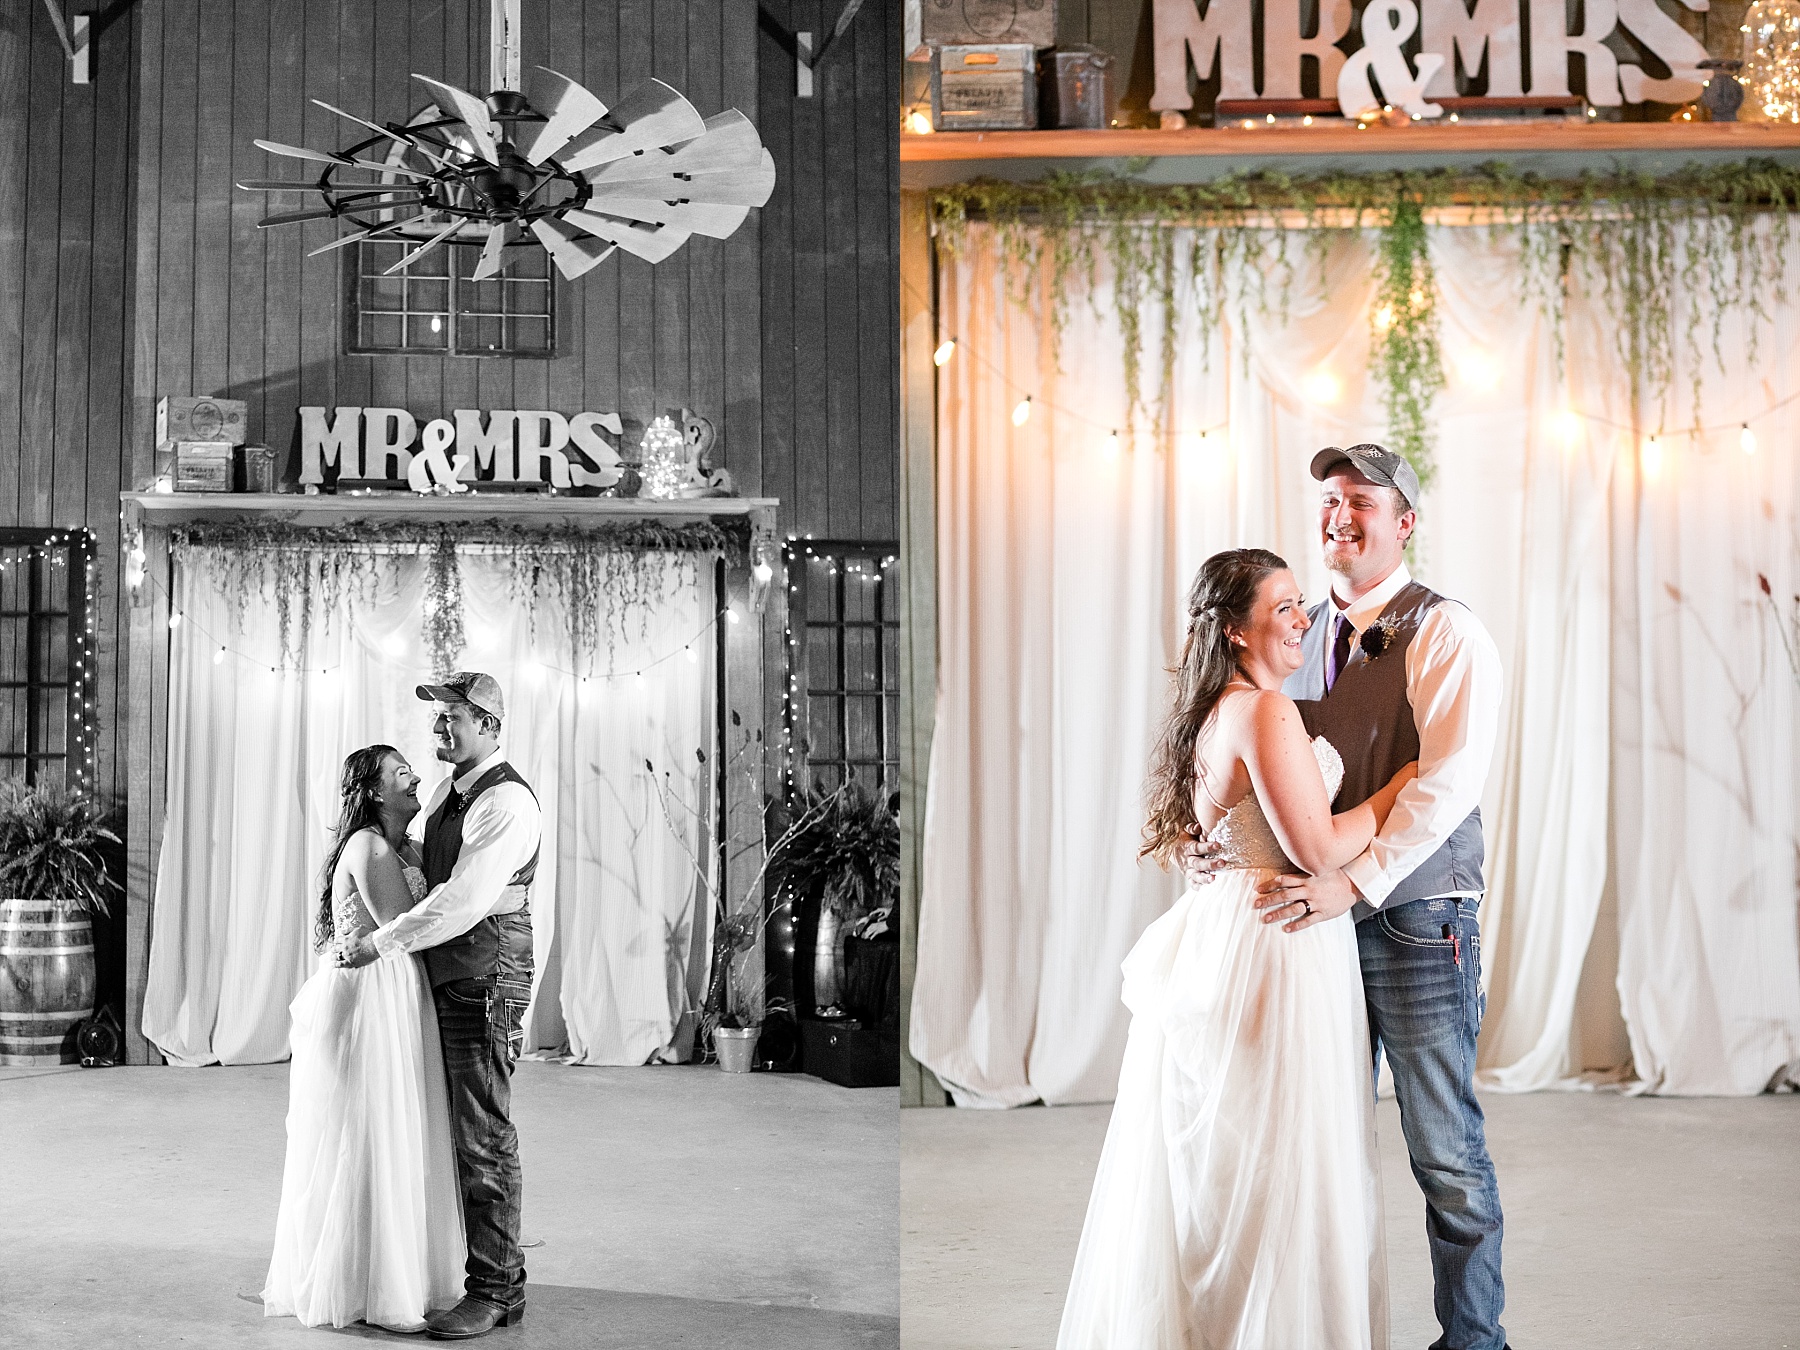 Paris and Shawn were married at The Church Barn wedding venue in Barron, WI